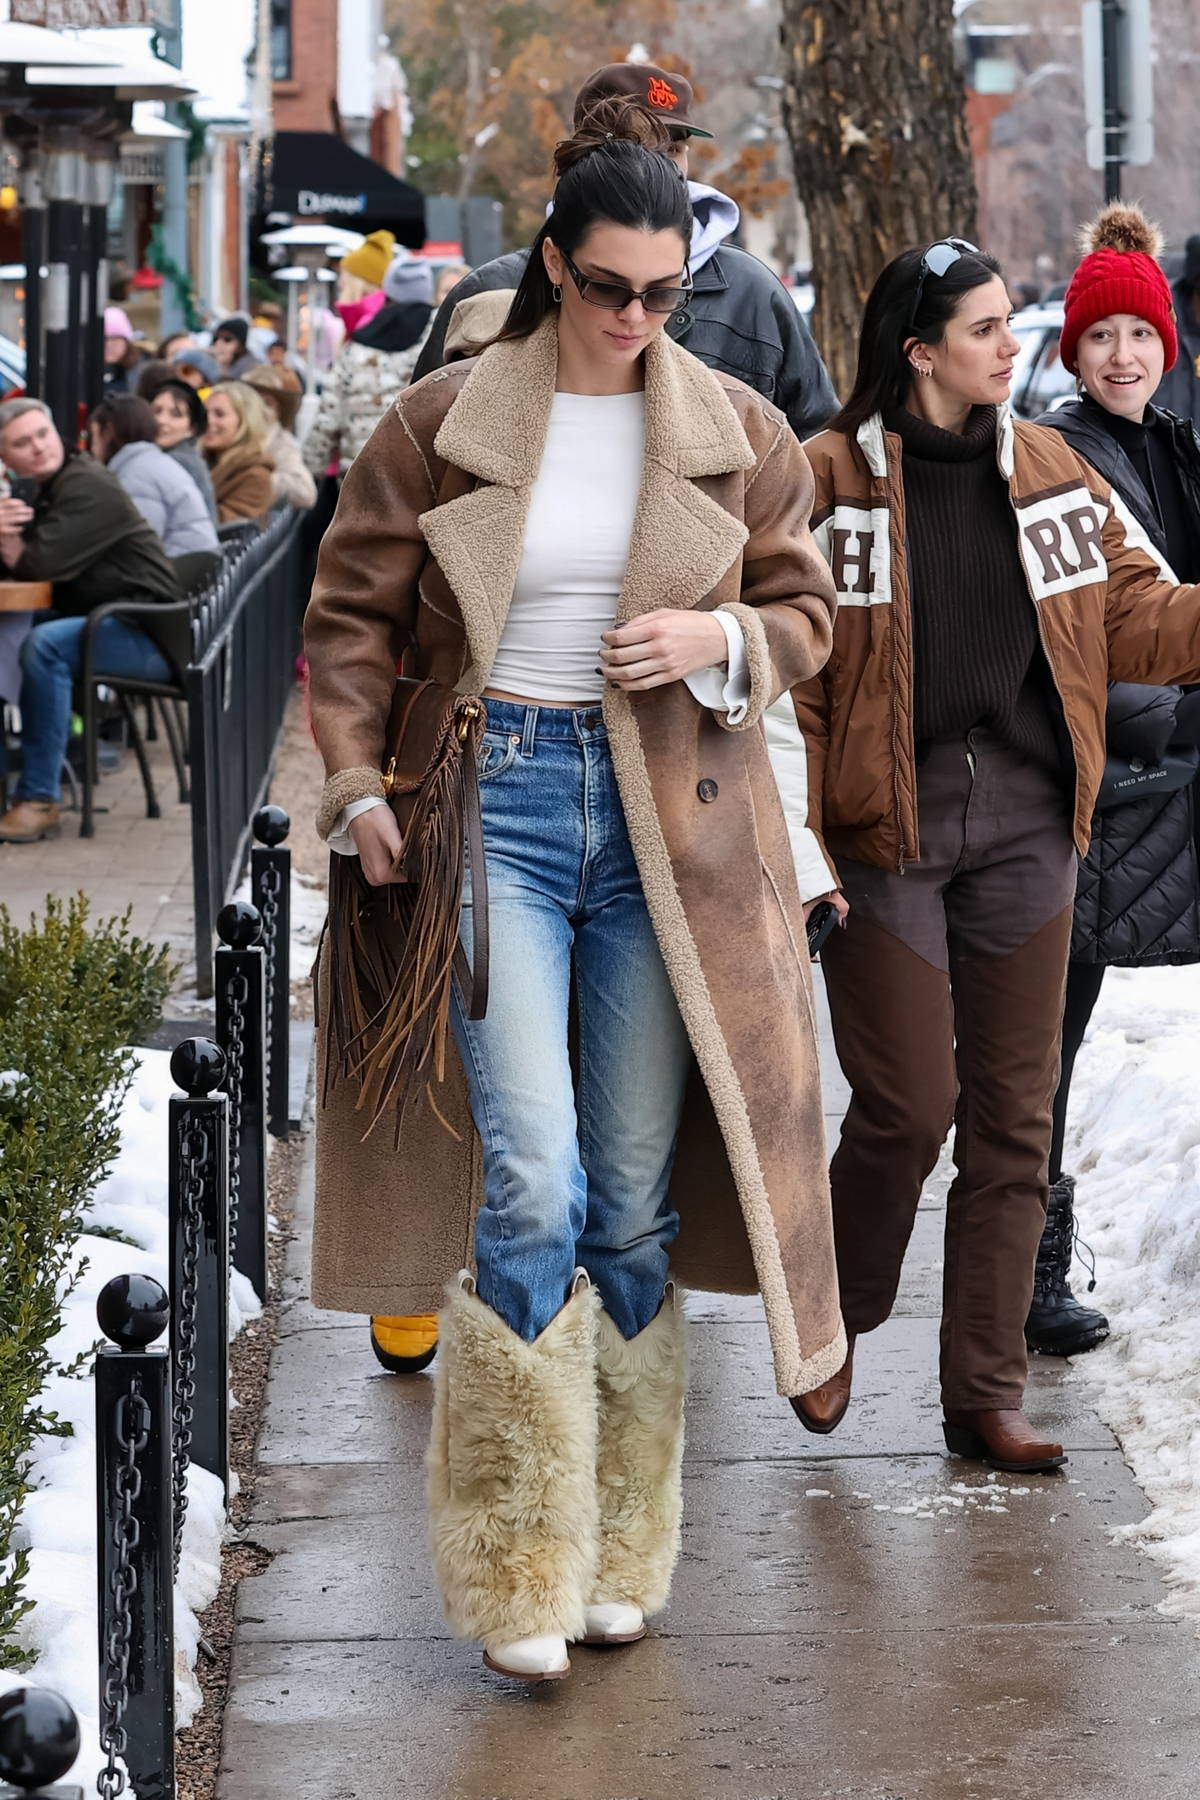 Kendall Jenner Sports A Pair Of Wild Cowboy Boots In Aspen